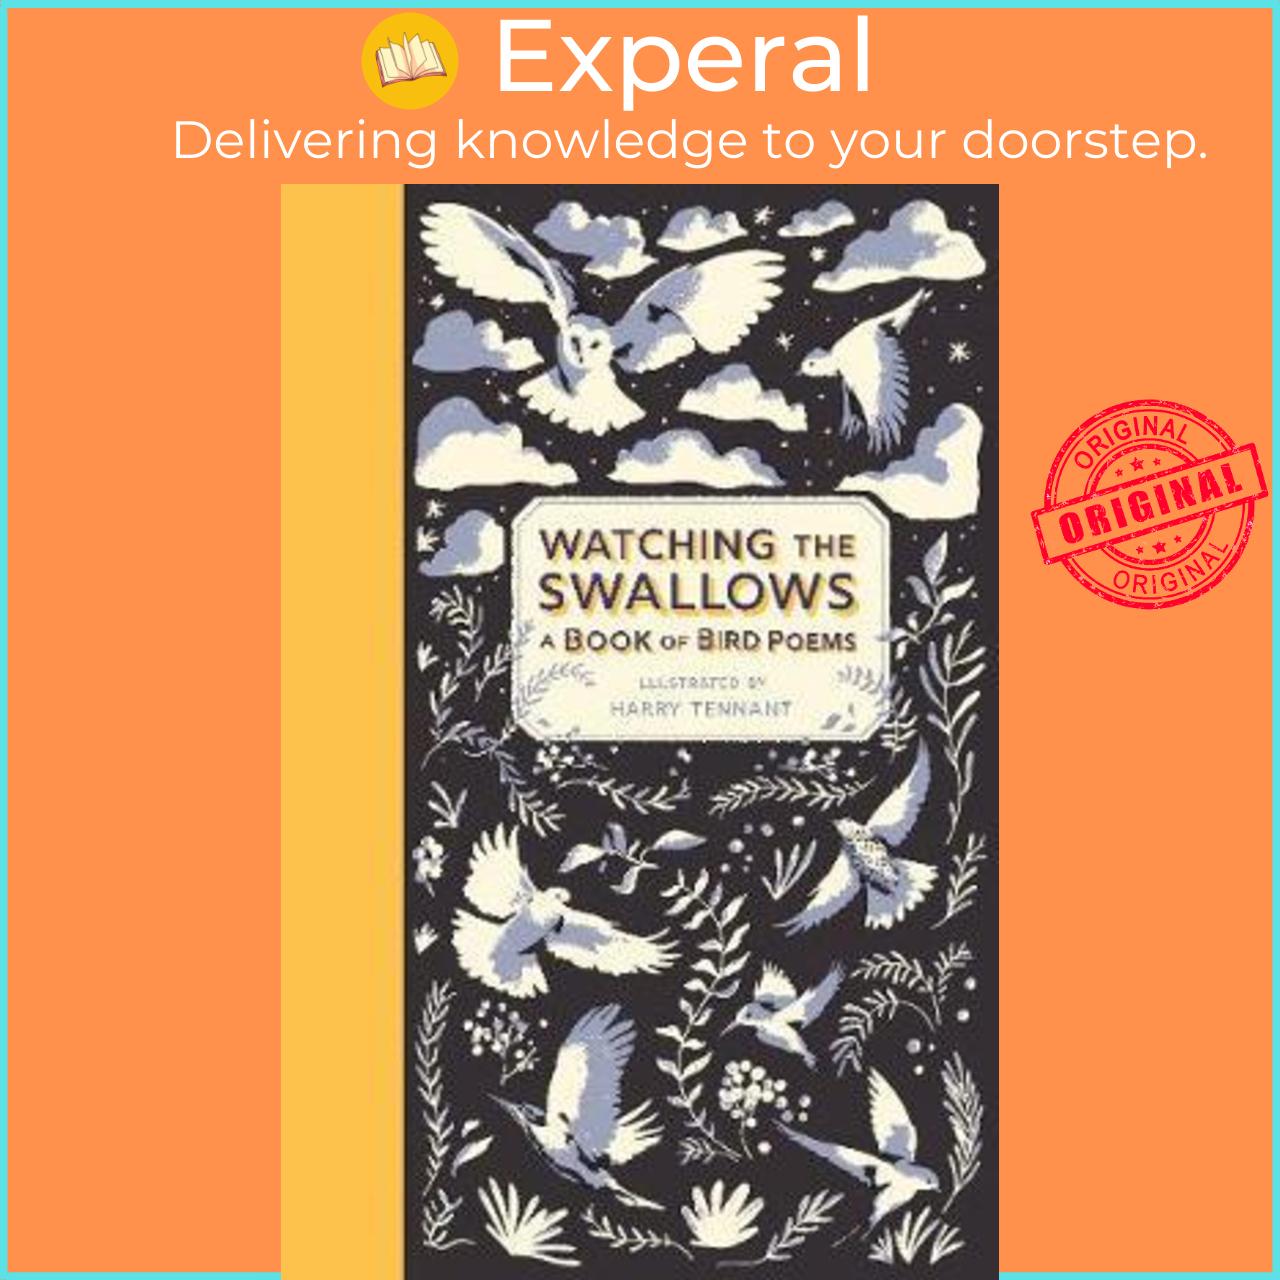 Sách - Watching the Swallows: A Book of Bird Poems by Harry Tennant (UK edition, hardcover)